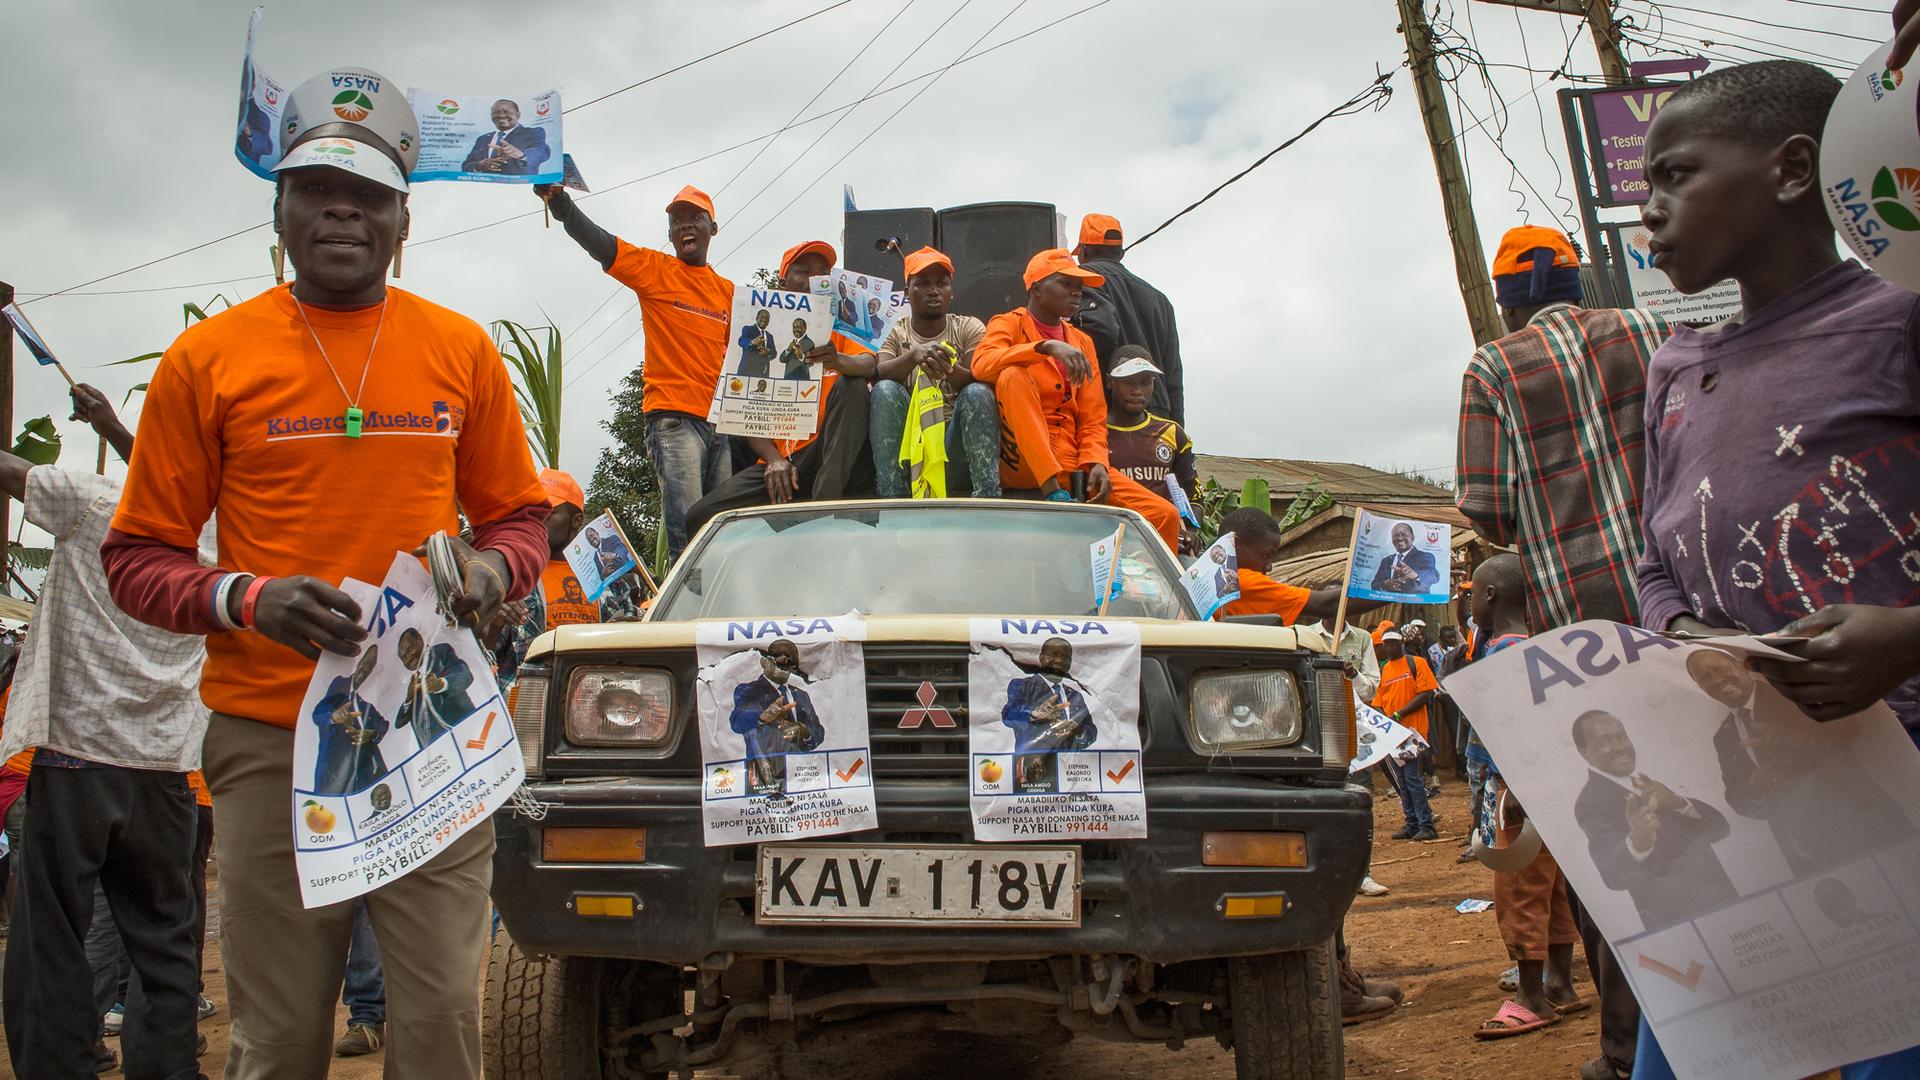 Opposition party members chant campaign slogans in support of National Super Alliance Presidential candidate, Raila Odinga in Kibera, Nairobi. Kenya’s upcoming elections pinned current President Uhuru Kenyatta against his long-time rival Odinga, who has c